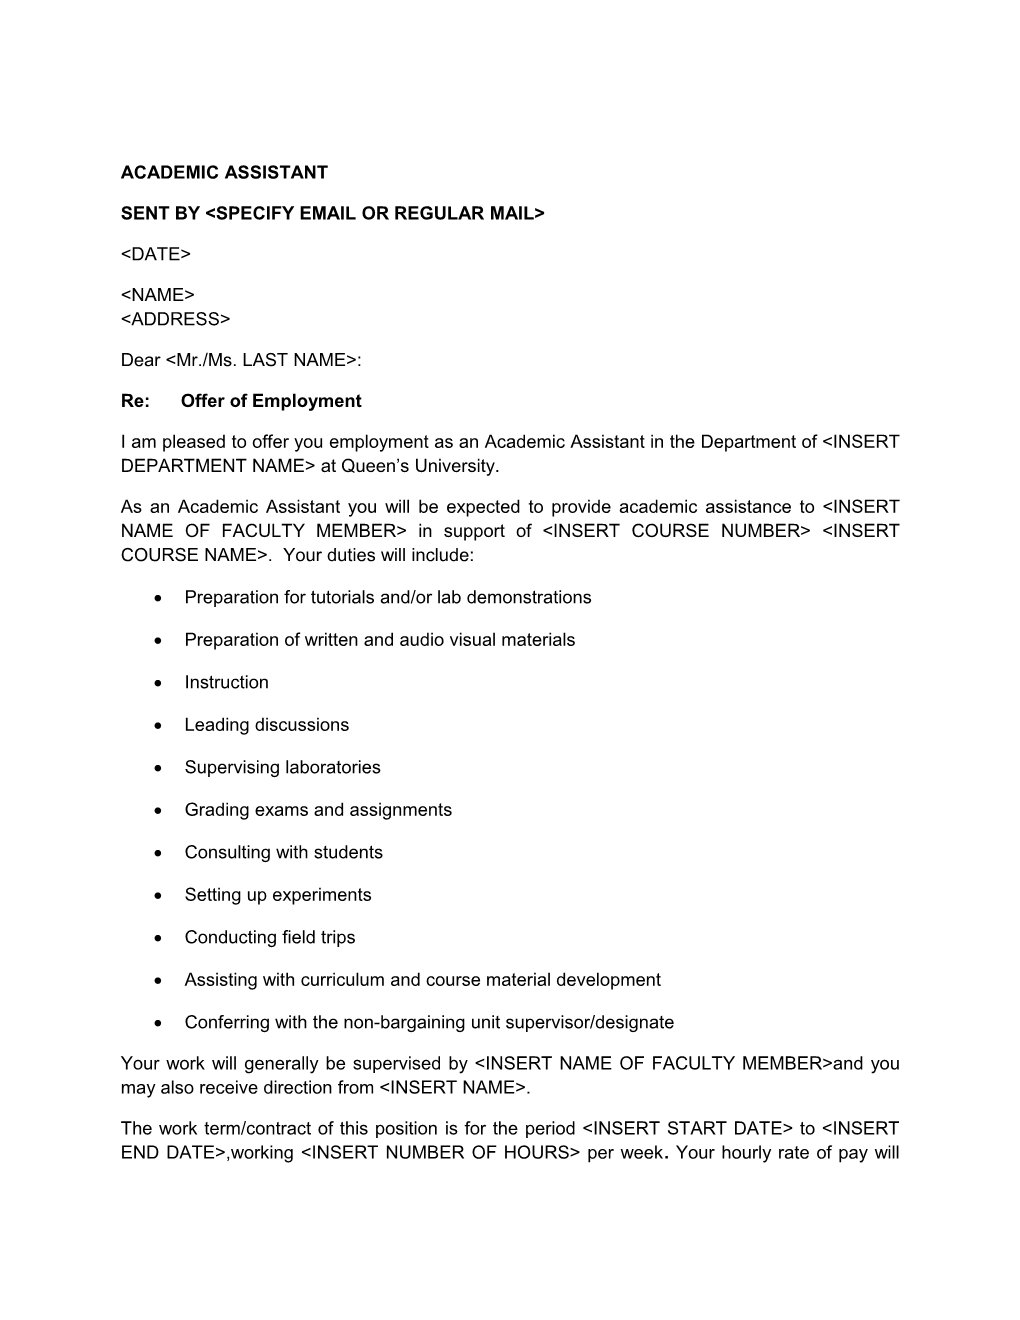 Academic Assistant Usw Template Offer Letter